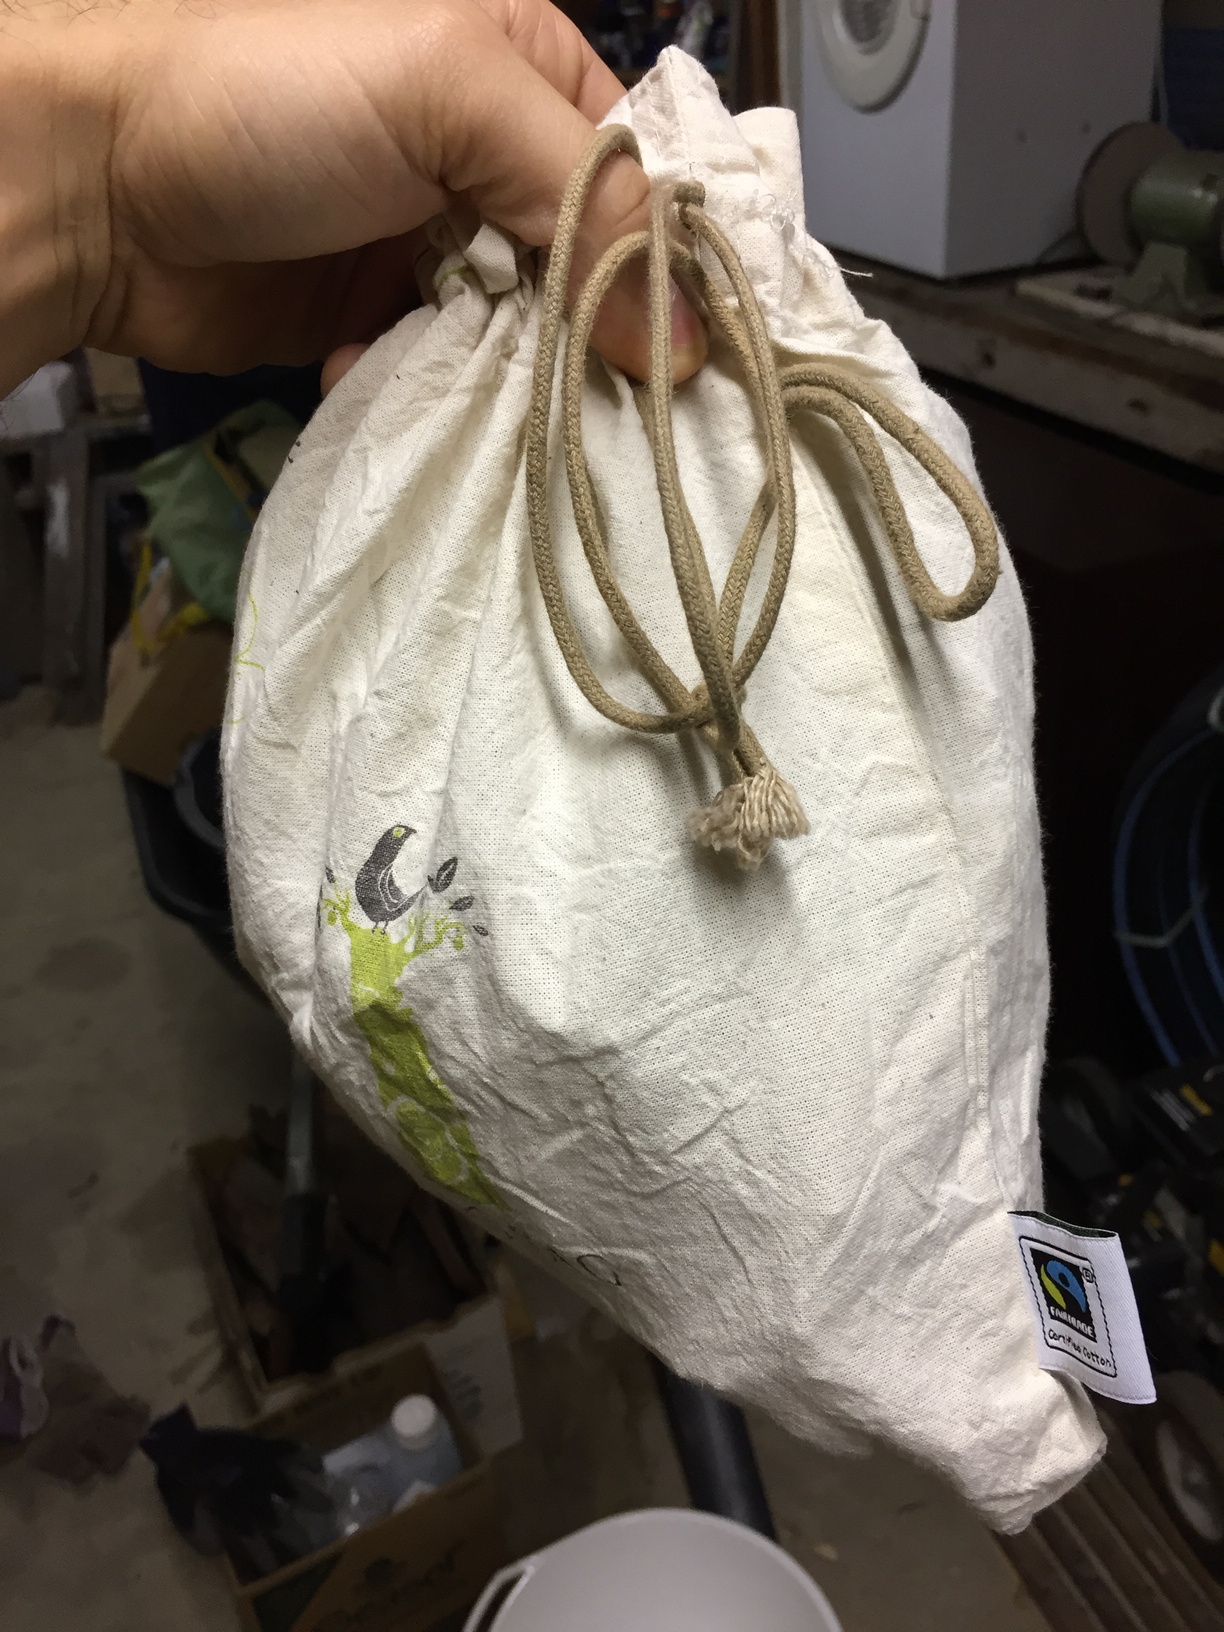 This is the canvas bag I stored the wheat in.